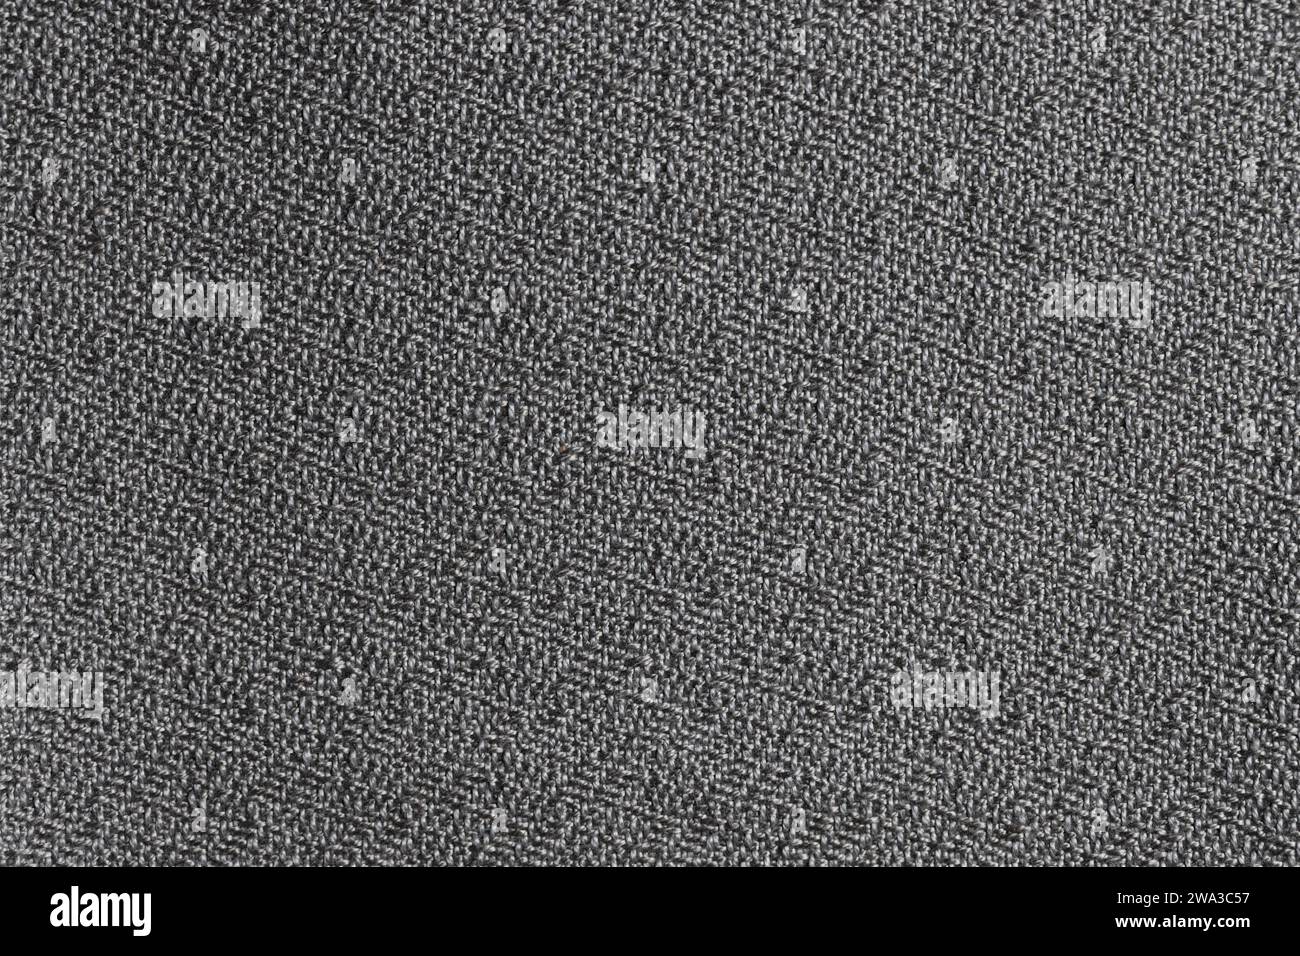 gray shiny crepe weave fabric, close up macro, shows weave and fiber detail, neutral color background Stock Photo